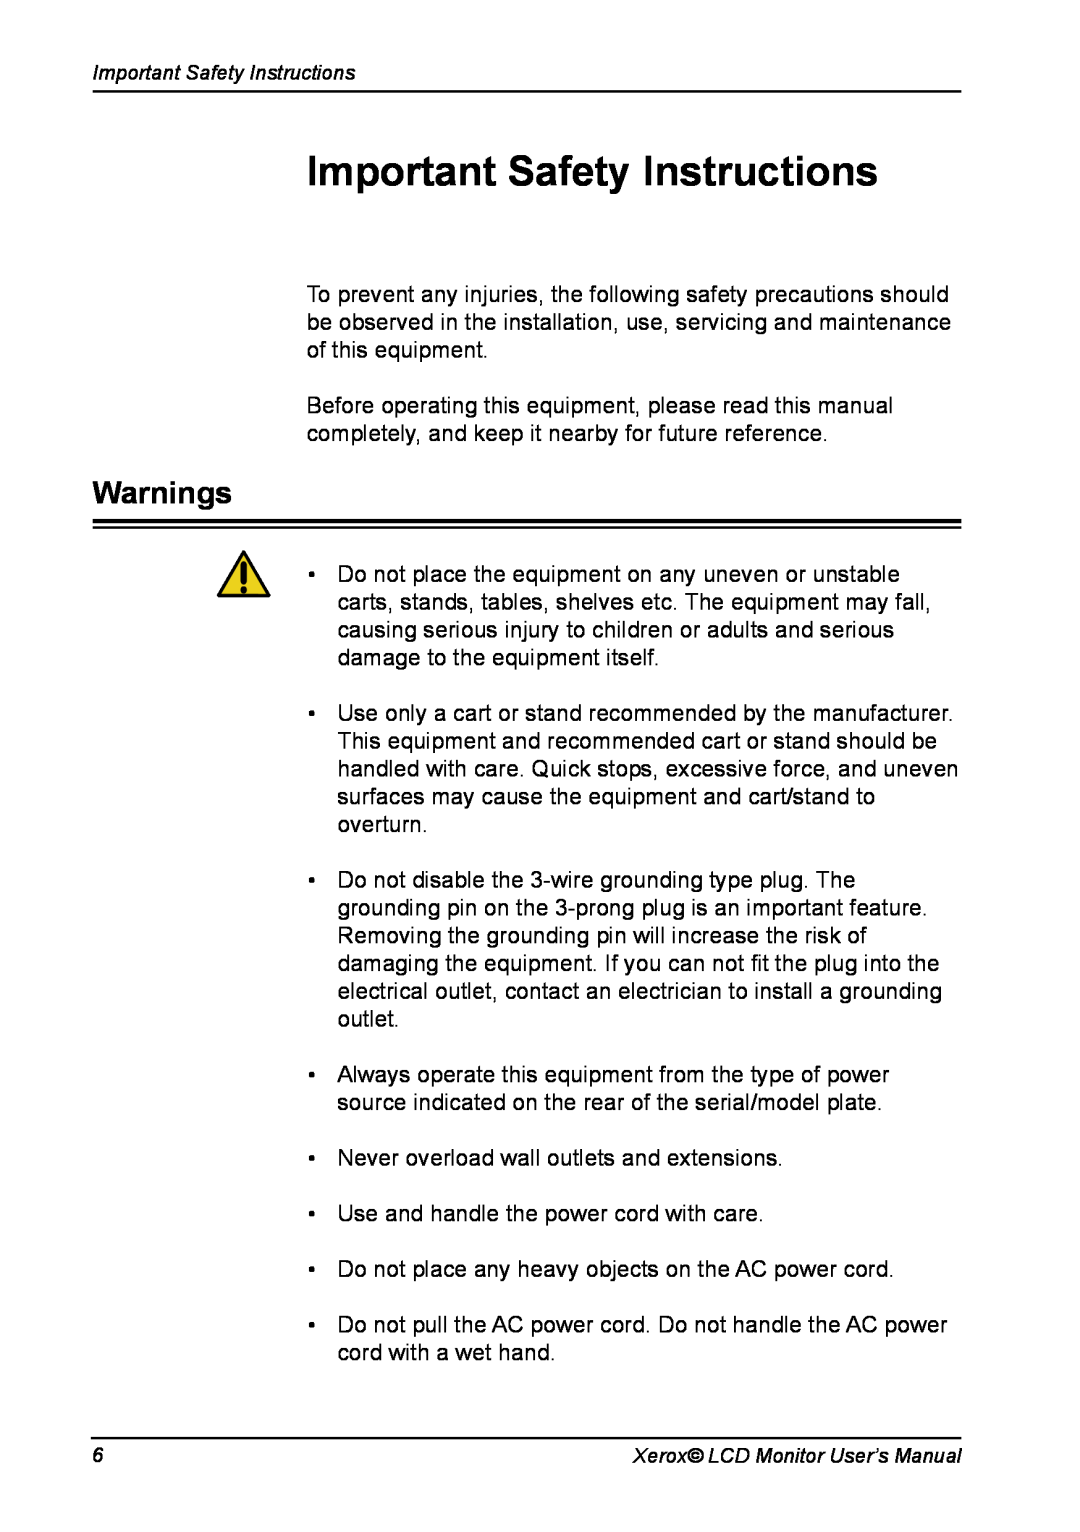 Xerox XR6 Series manual Important Safety Instructions, Warnings 